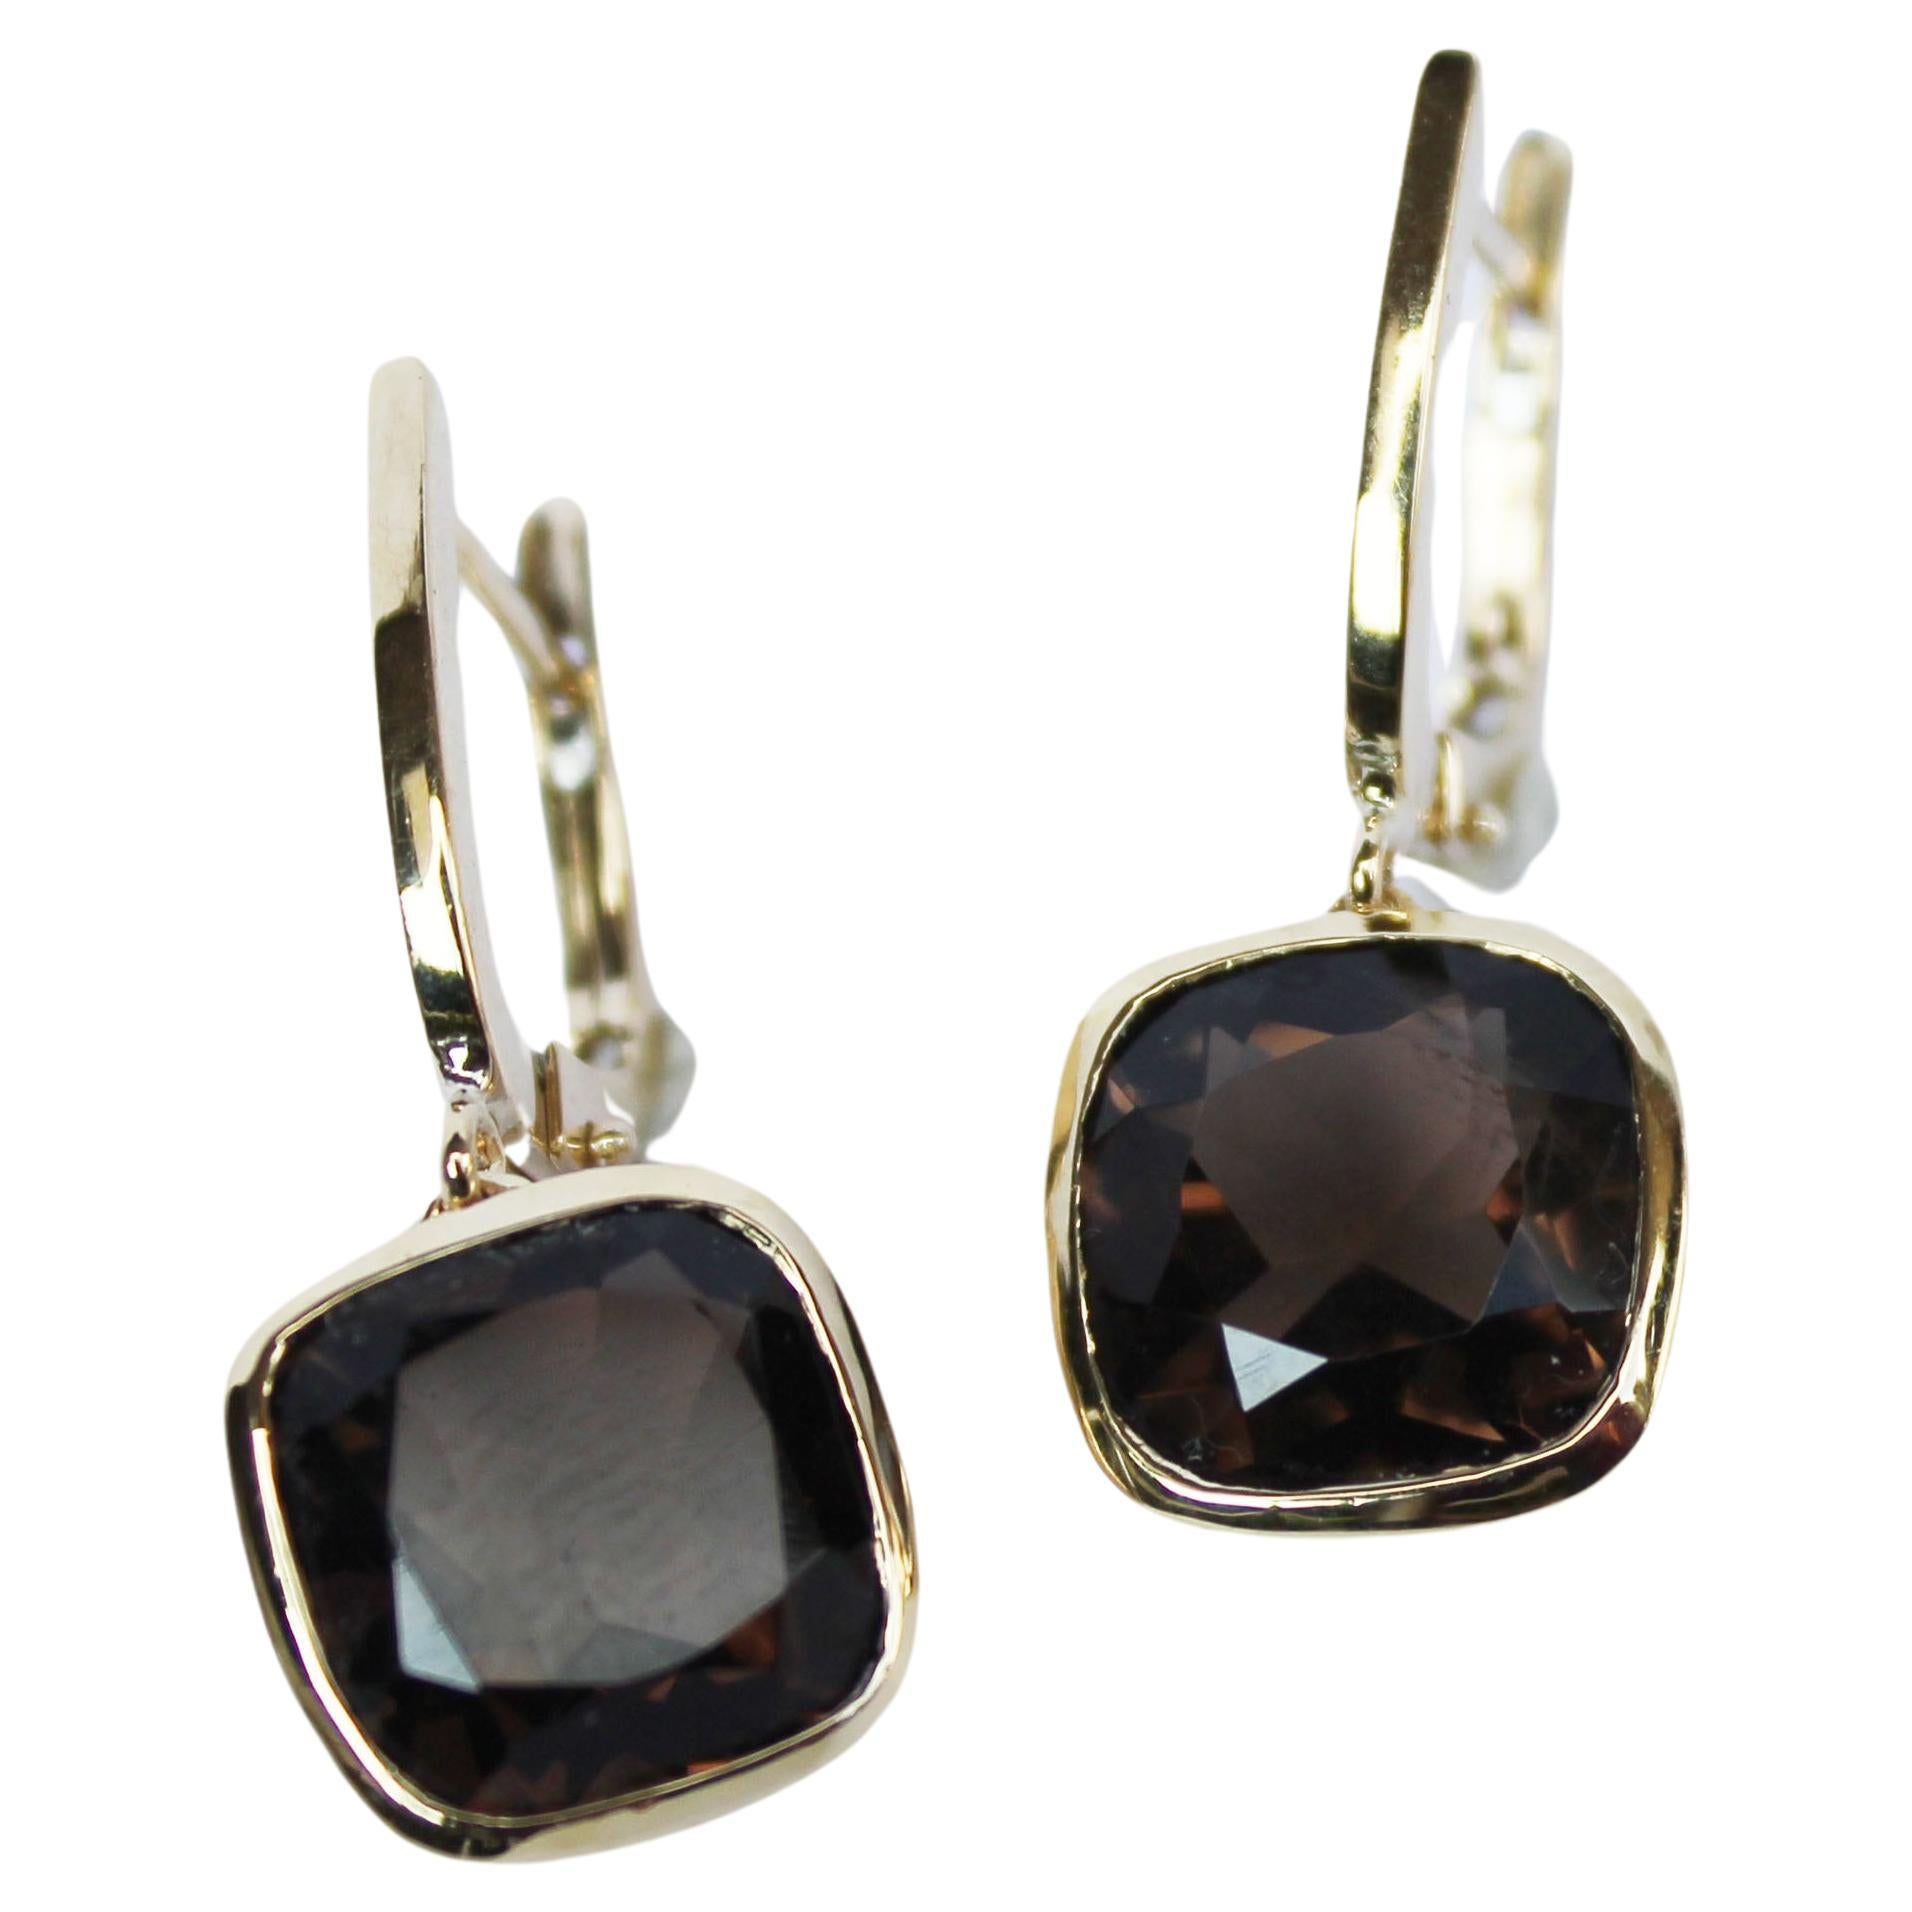 Earrings in yellow gold 18 Karat with smoke Quartz (square cut, size: 10 mm)

All Stanoppi Jewelry is new and has never been previously owned or worn. Each item will arrive at your door beautifully gift wrapped in Stanoppi boxes, put inside an